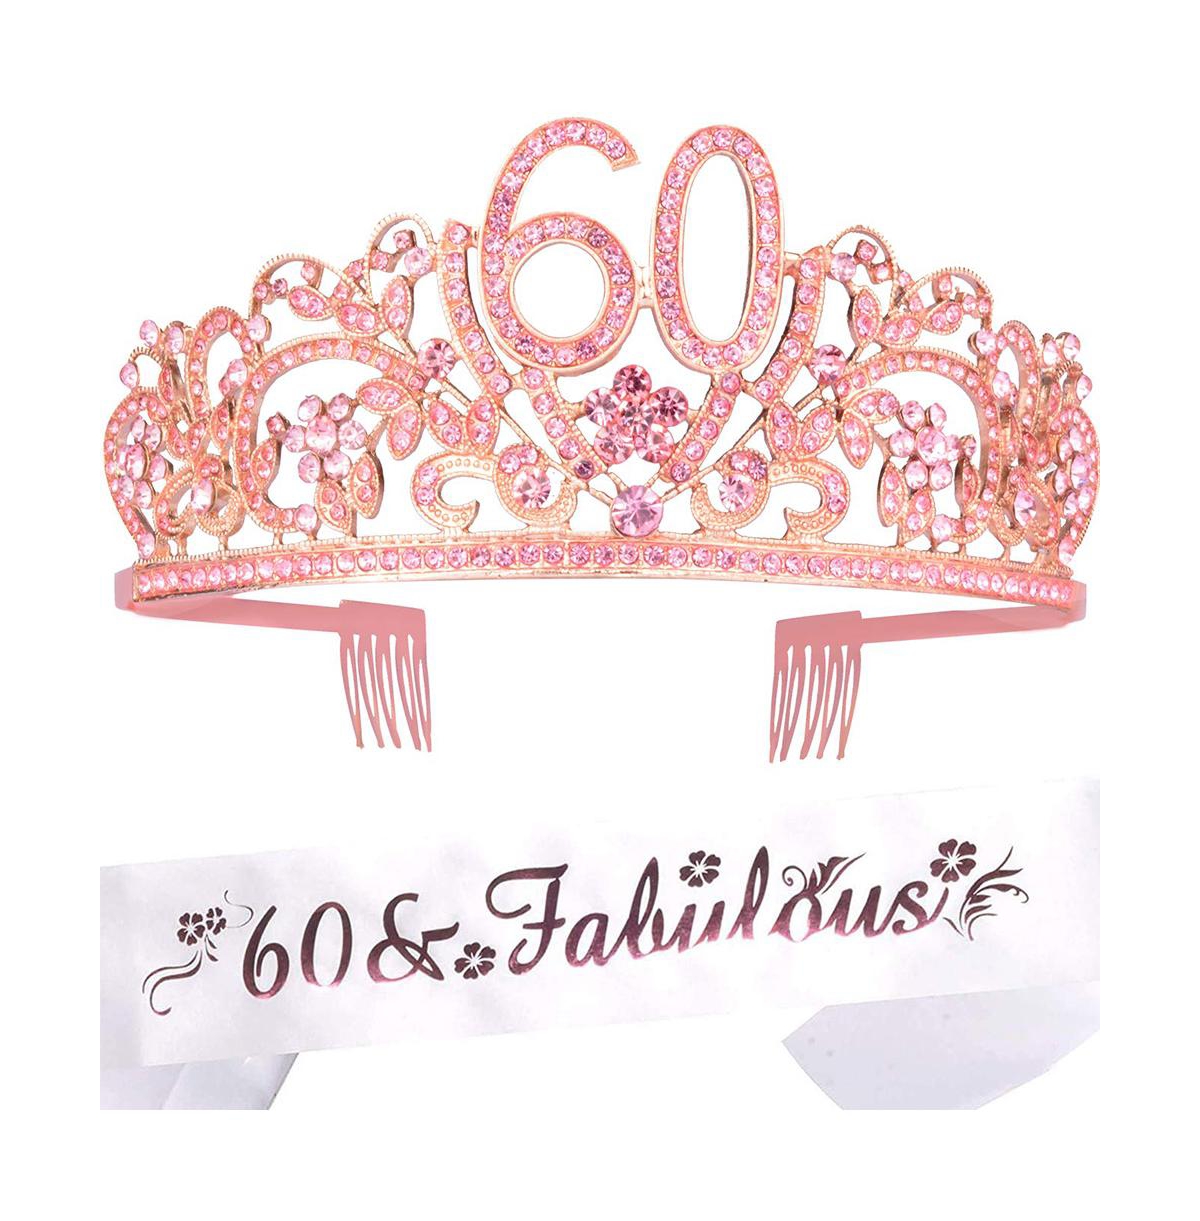 60th Birthday Sash and Tiara Set for Women - Glittery Sash with Floral Rhinestone Design and Pink Premium Metal Tiara, Perfect for 60th Birthday Party